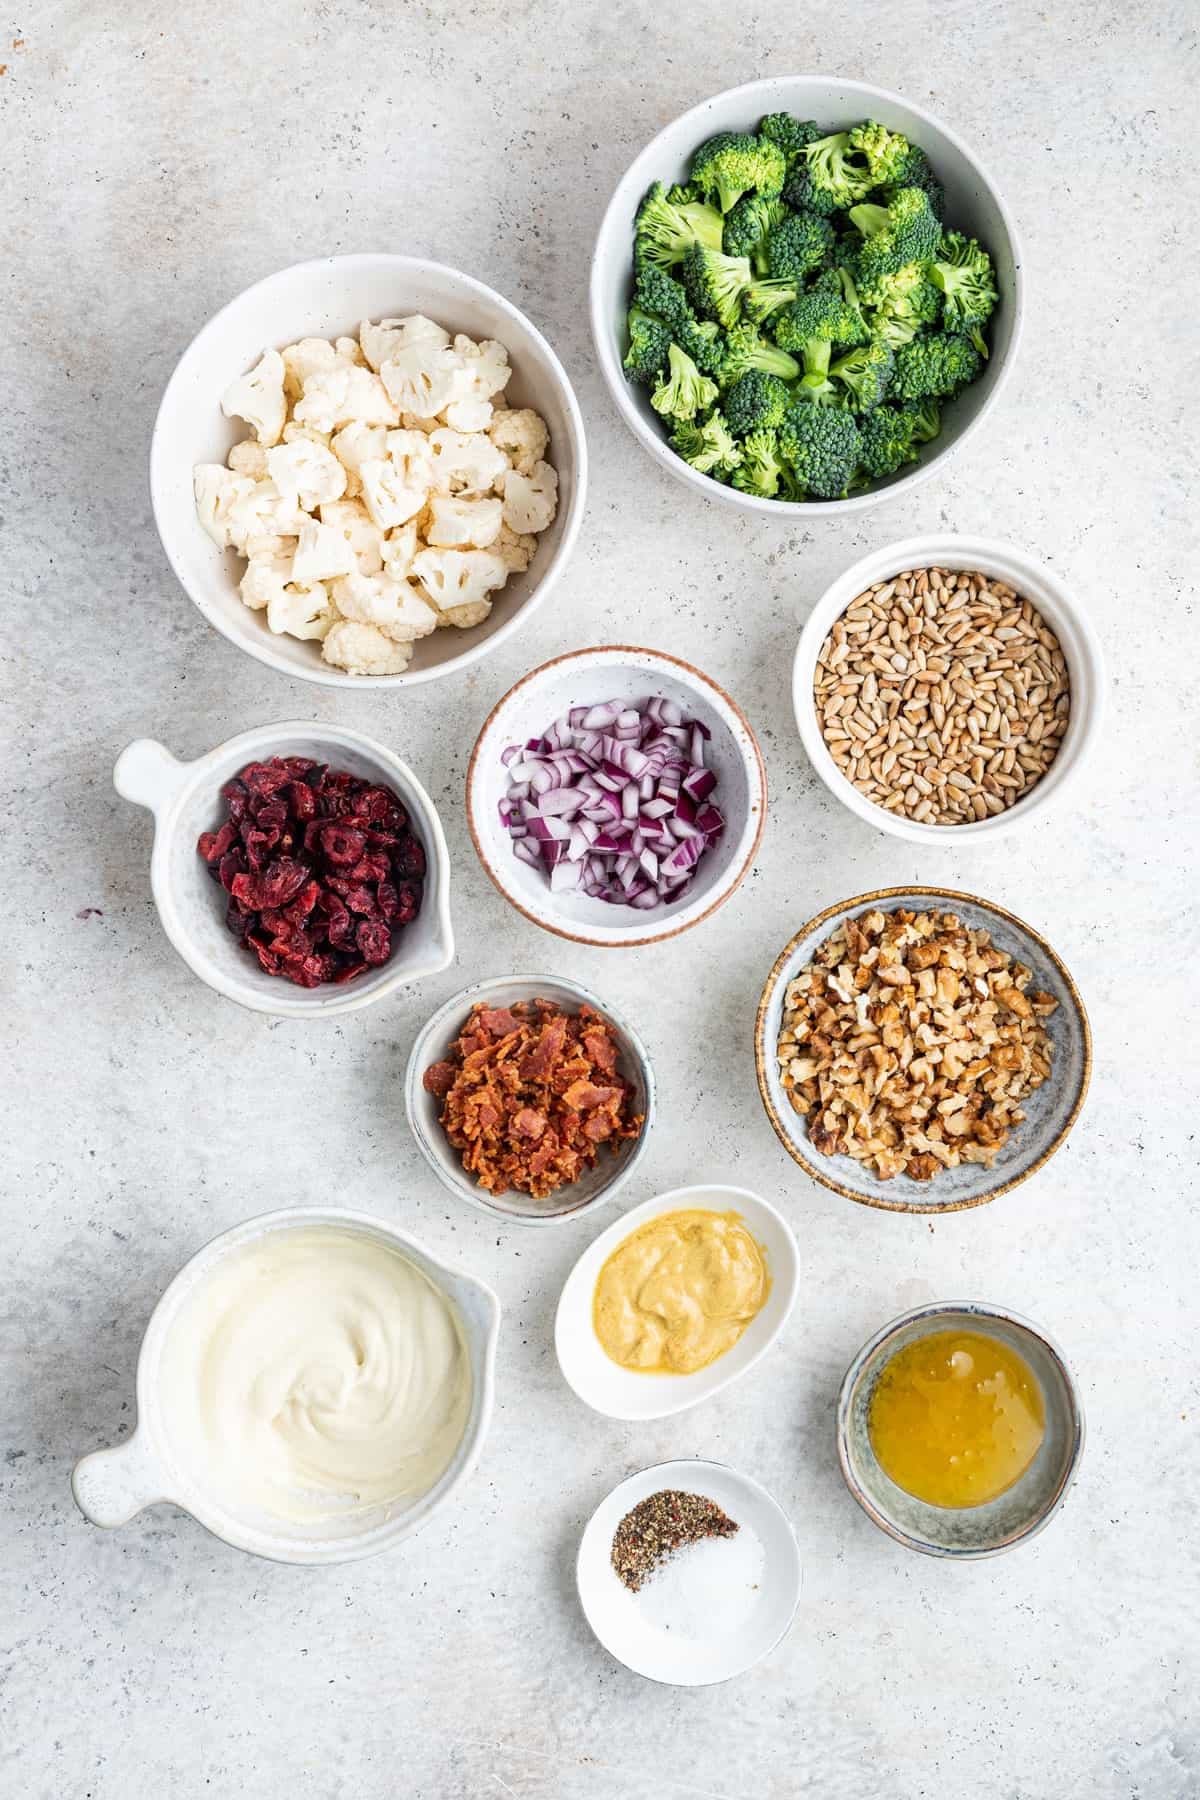 Overhead view of the ingredients needed for broccoli cauliflower salad: a bowl of broccoli, a bowl of cauliflower, a bowl of onions, a bowl of sunflower seeds, a bowl of walnuts, a bowl of dried cranberries, a bowl of bacon bits, a bowl of mayonnaise, a bowl of mustard, a bowl of honey, and a bowl of salt and pepper